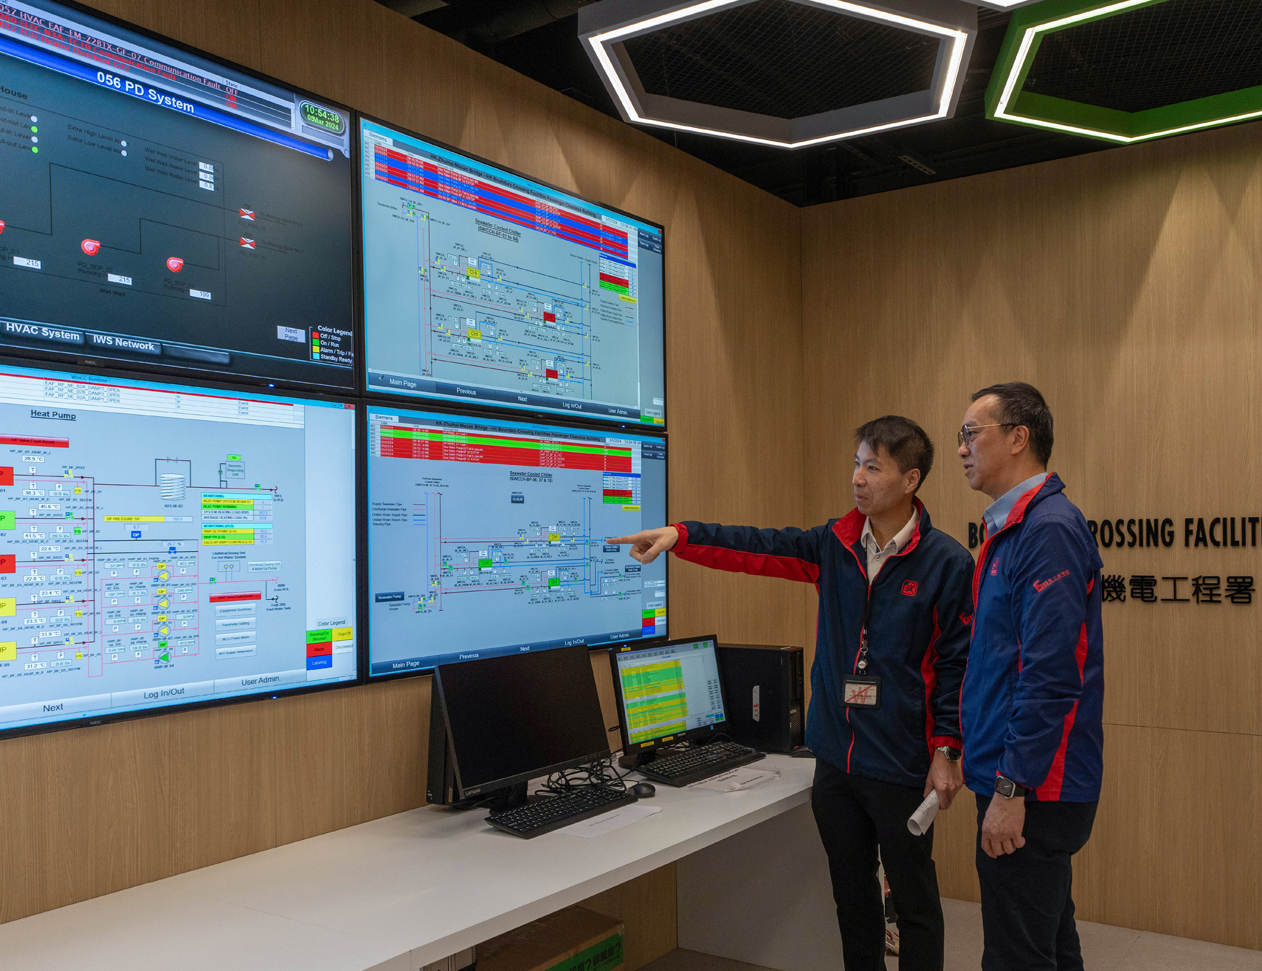 The EMSD developed an AI system for the DCS at the Port to contribute to the achievement of carbon neutrality for Hong Kong.